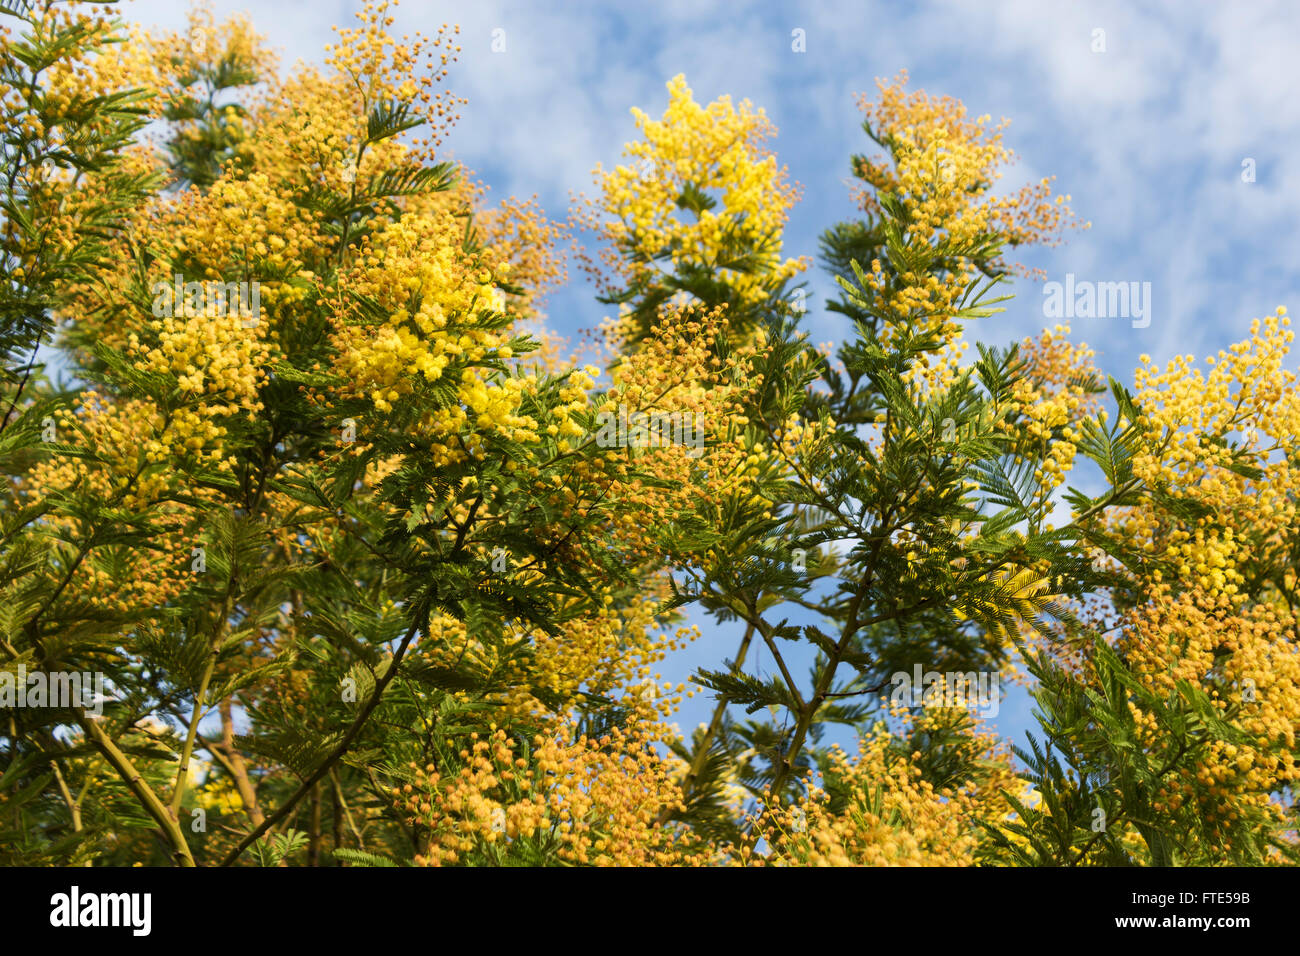 Mimosa trees in blossom, Spain, springtime. Stock Photo